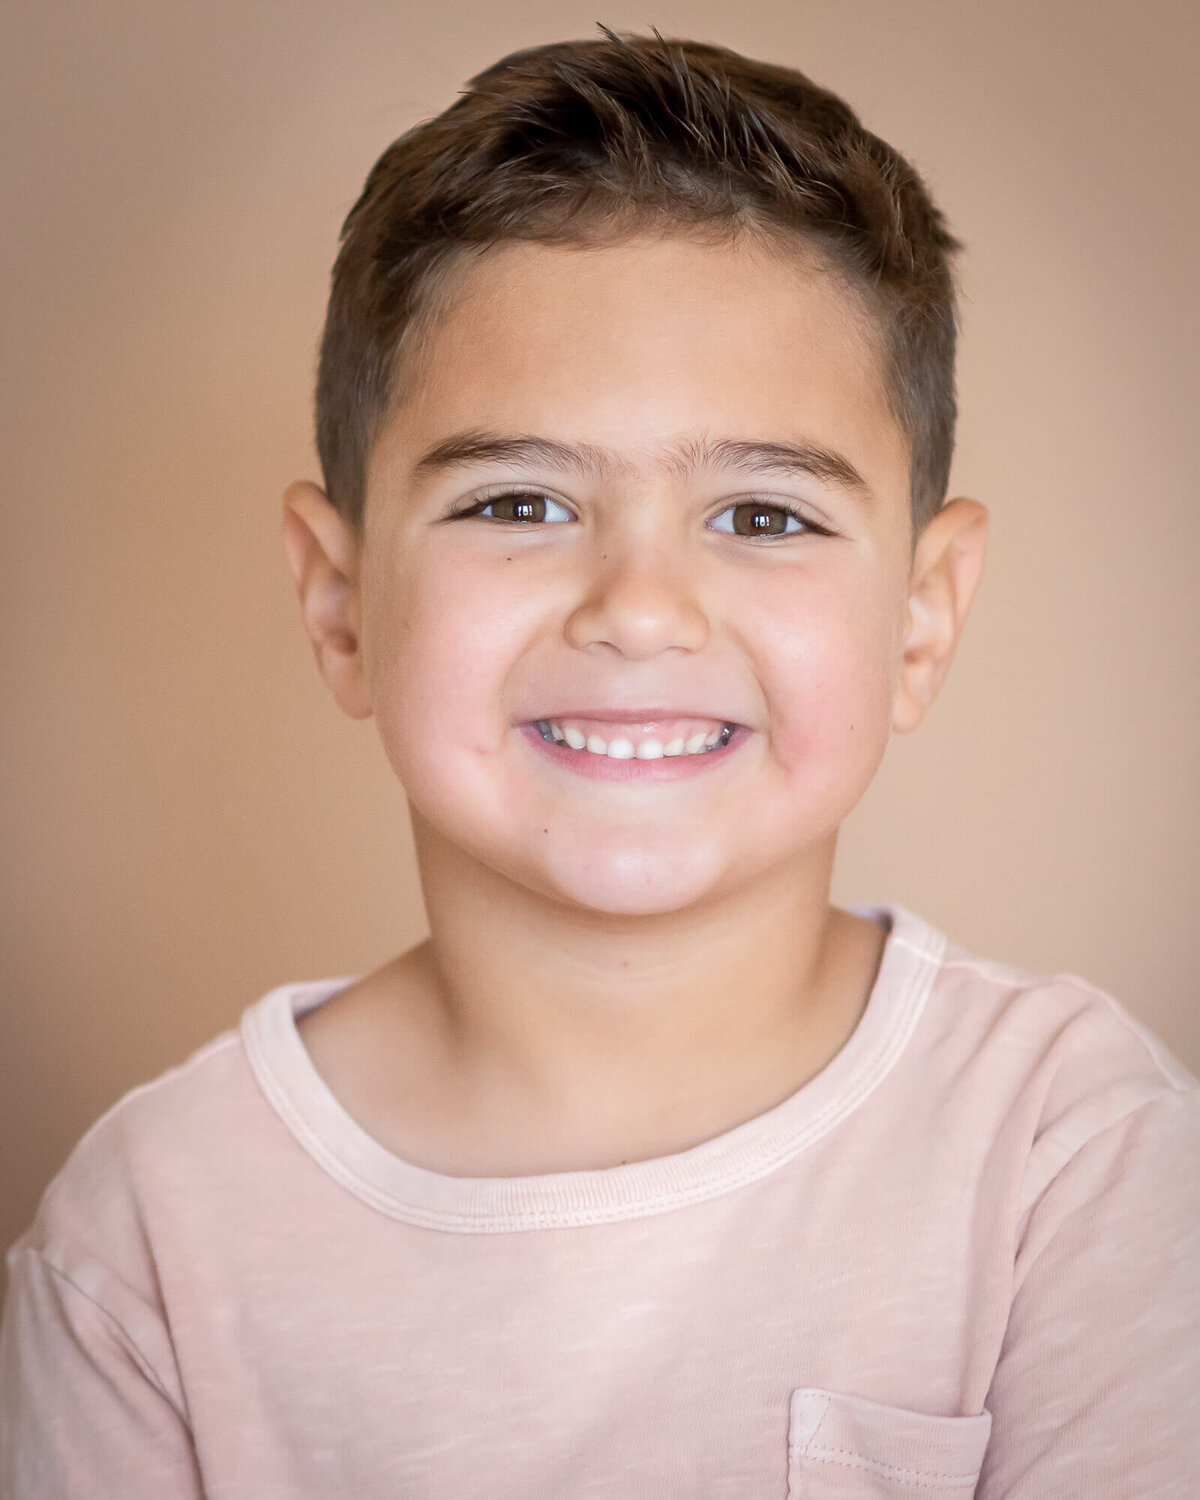 close up portrait of smiley uoung boy in a muted pink tee shirt with a tan background